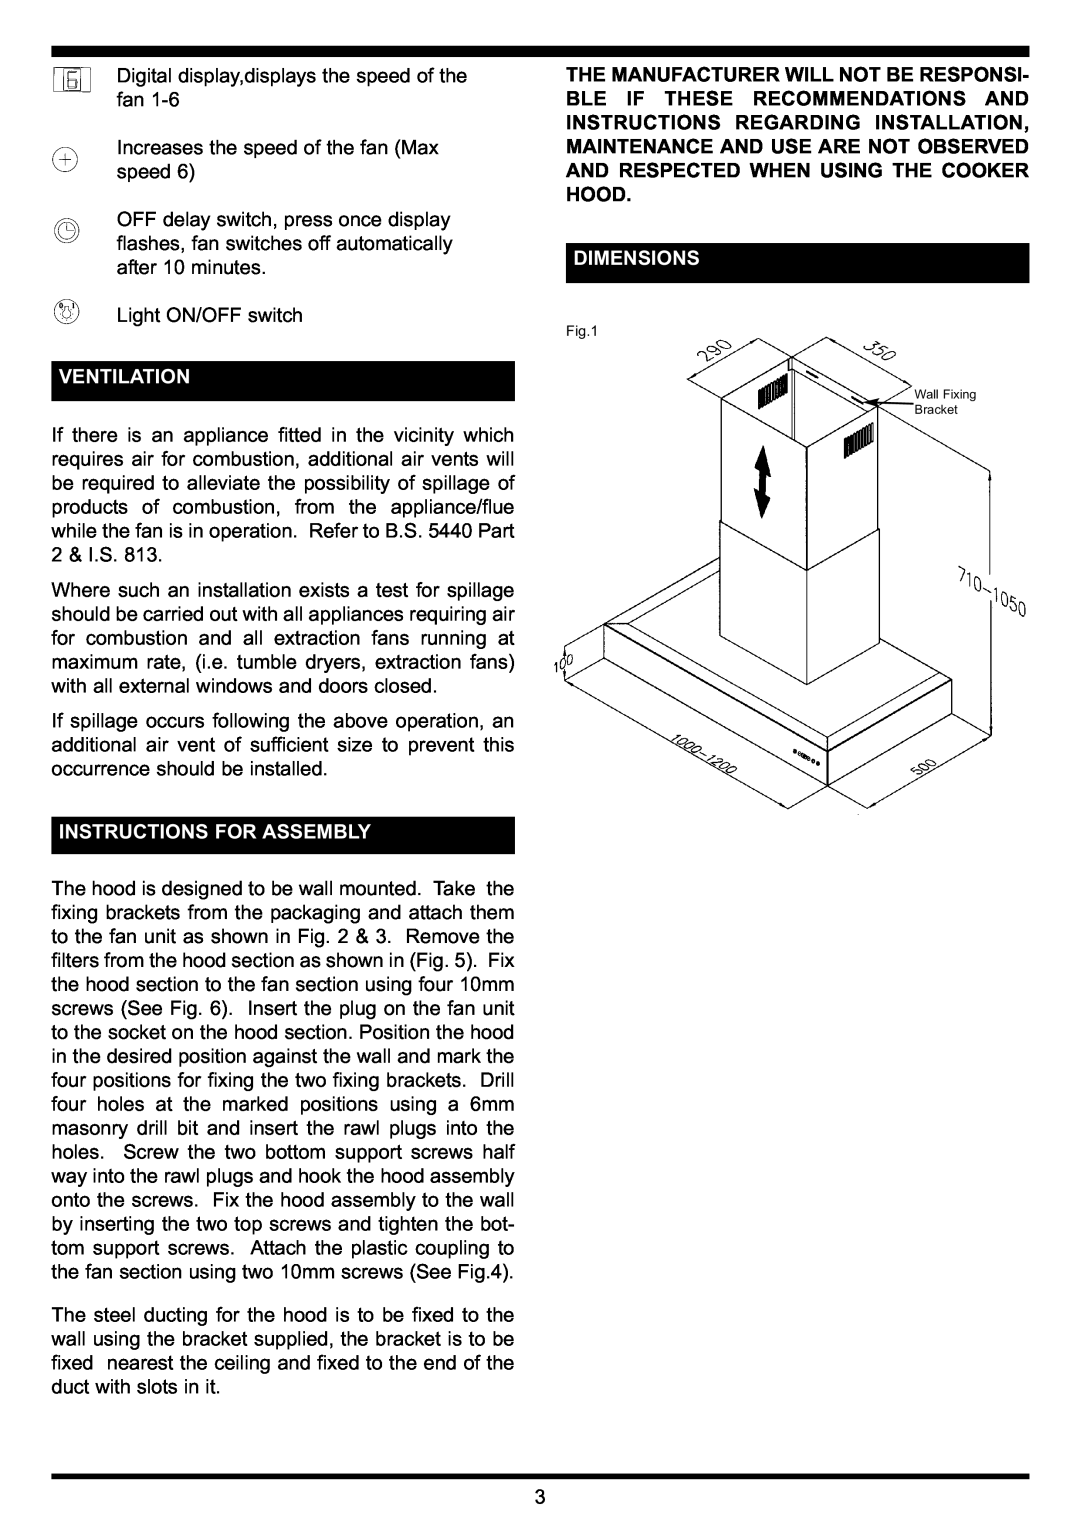 Waterford Precision Cycles Stainless Steel Box Hood manual Ventilation, Instructions For Assembly, Dimensions 